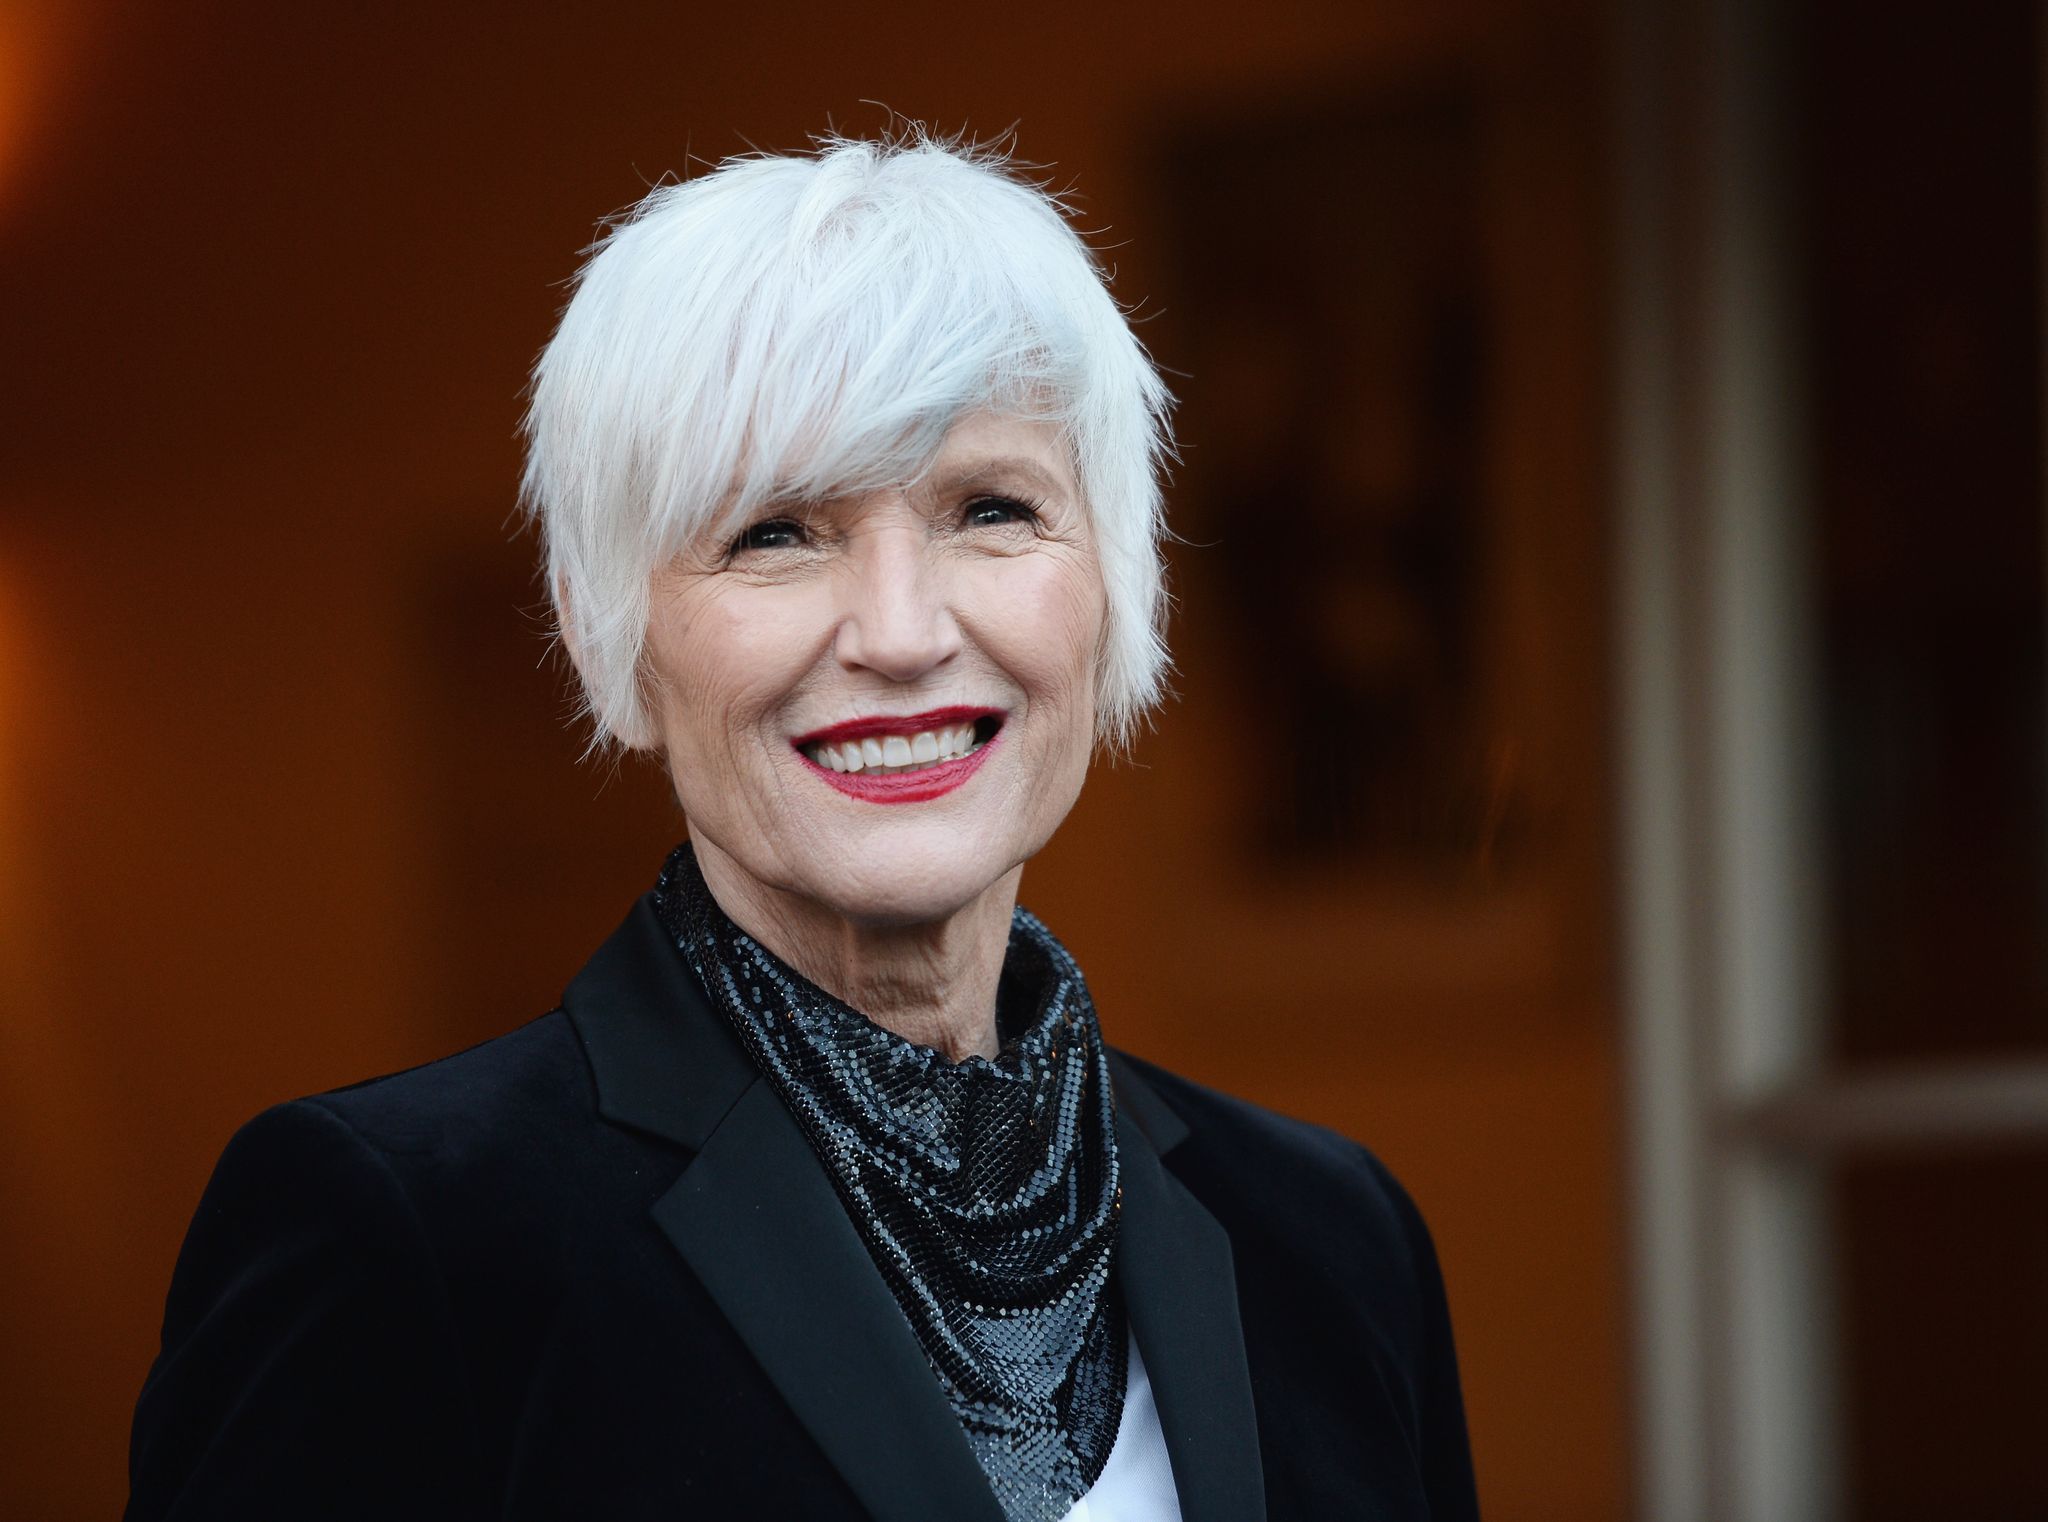 Maye Musk during the NYDJ Fall 2018 Campaign Celebration and Panel Event - "The Power Of Fit: Women Leading Change" at The Jane Club on October 18, 2018 in Los Angeles, California. | Source: Getty Images